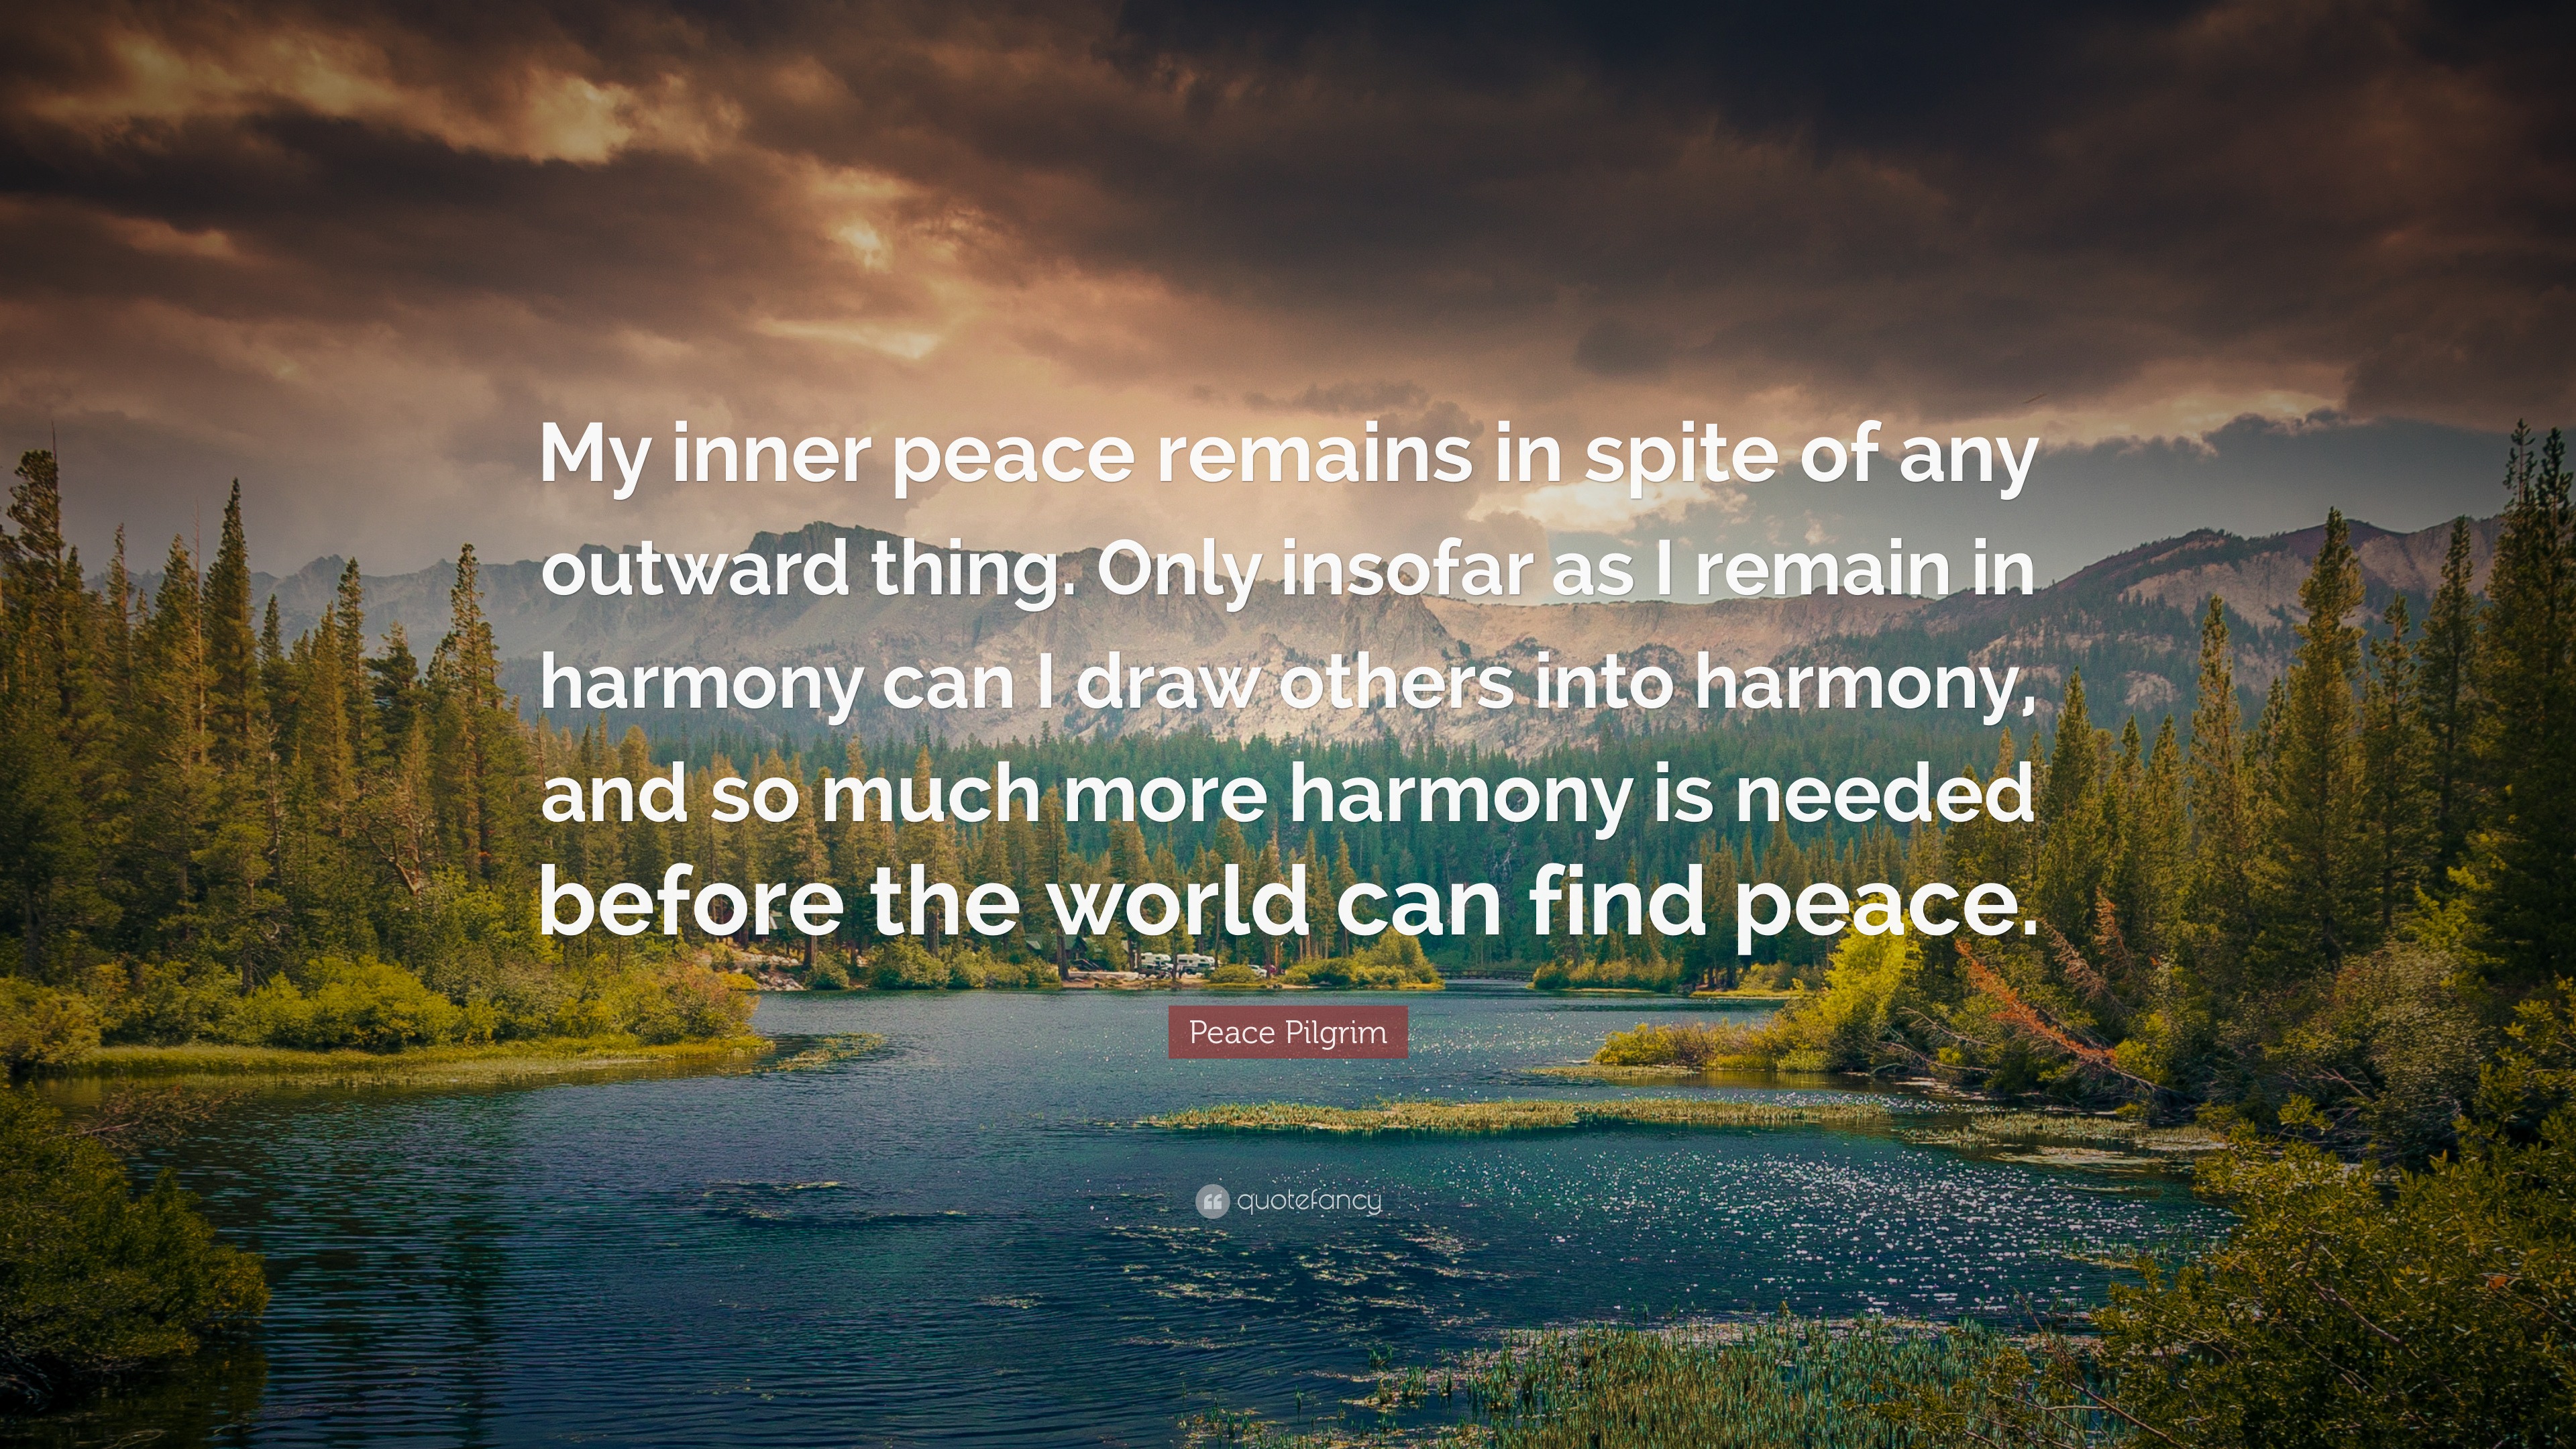 Be His Peace Quotes of all time The ultimate guide | quoteslast1